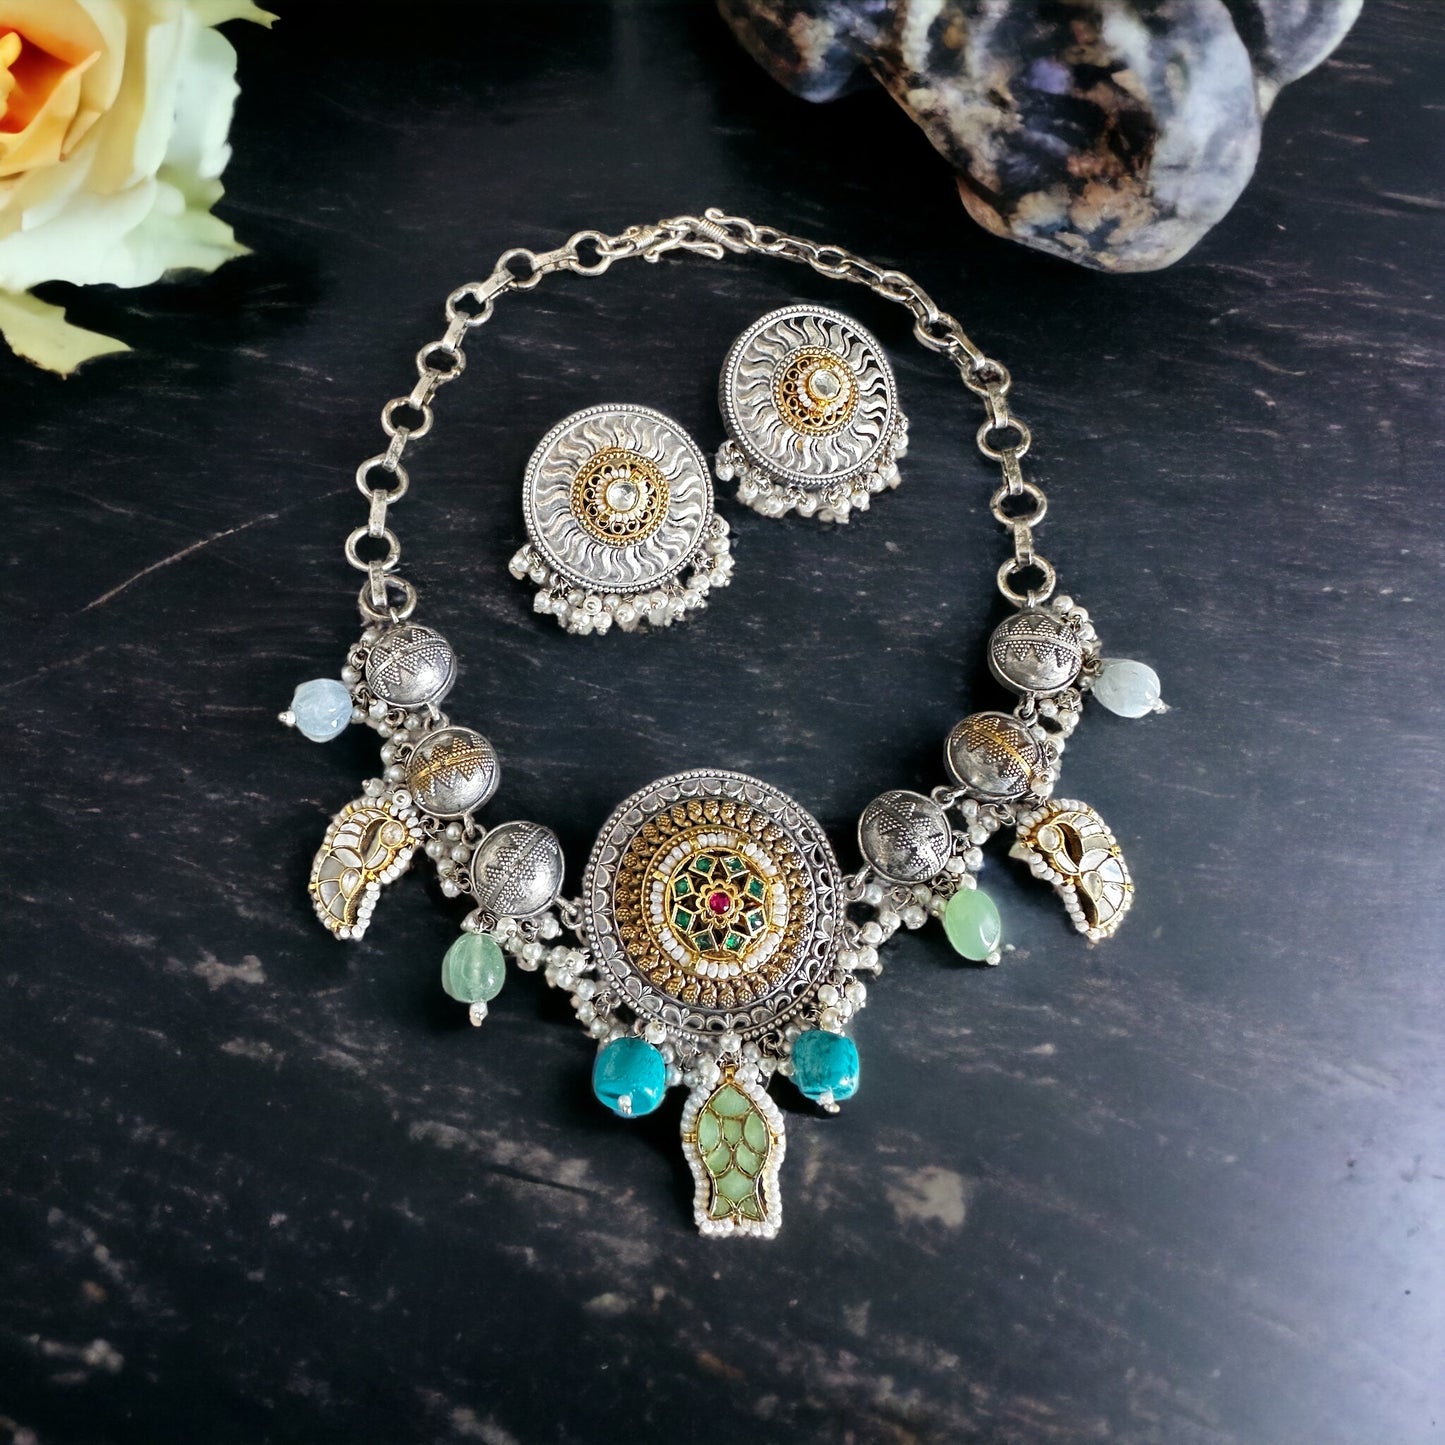 Silver look alike fusion necklace set - Beauty Sutra by Shikha